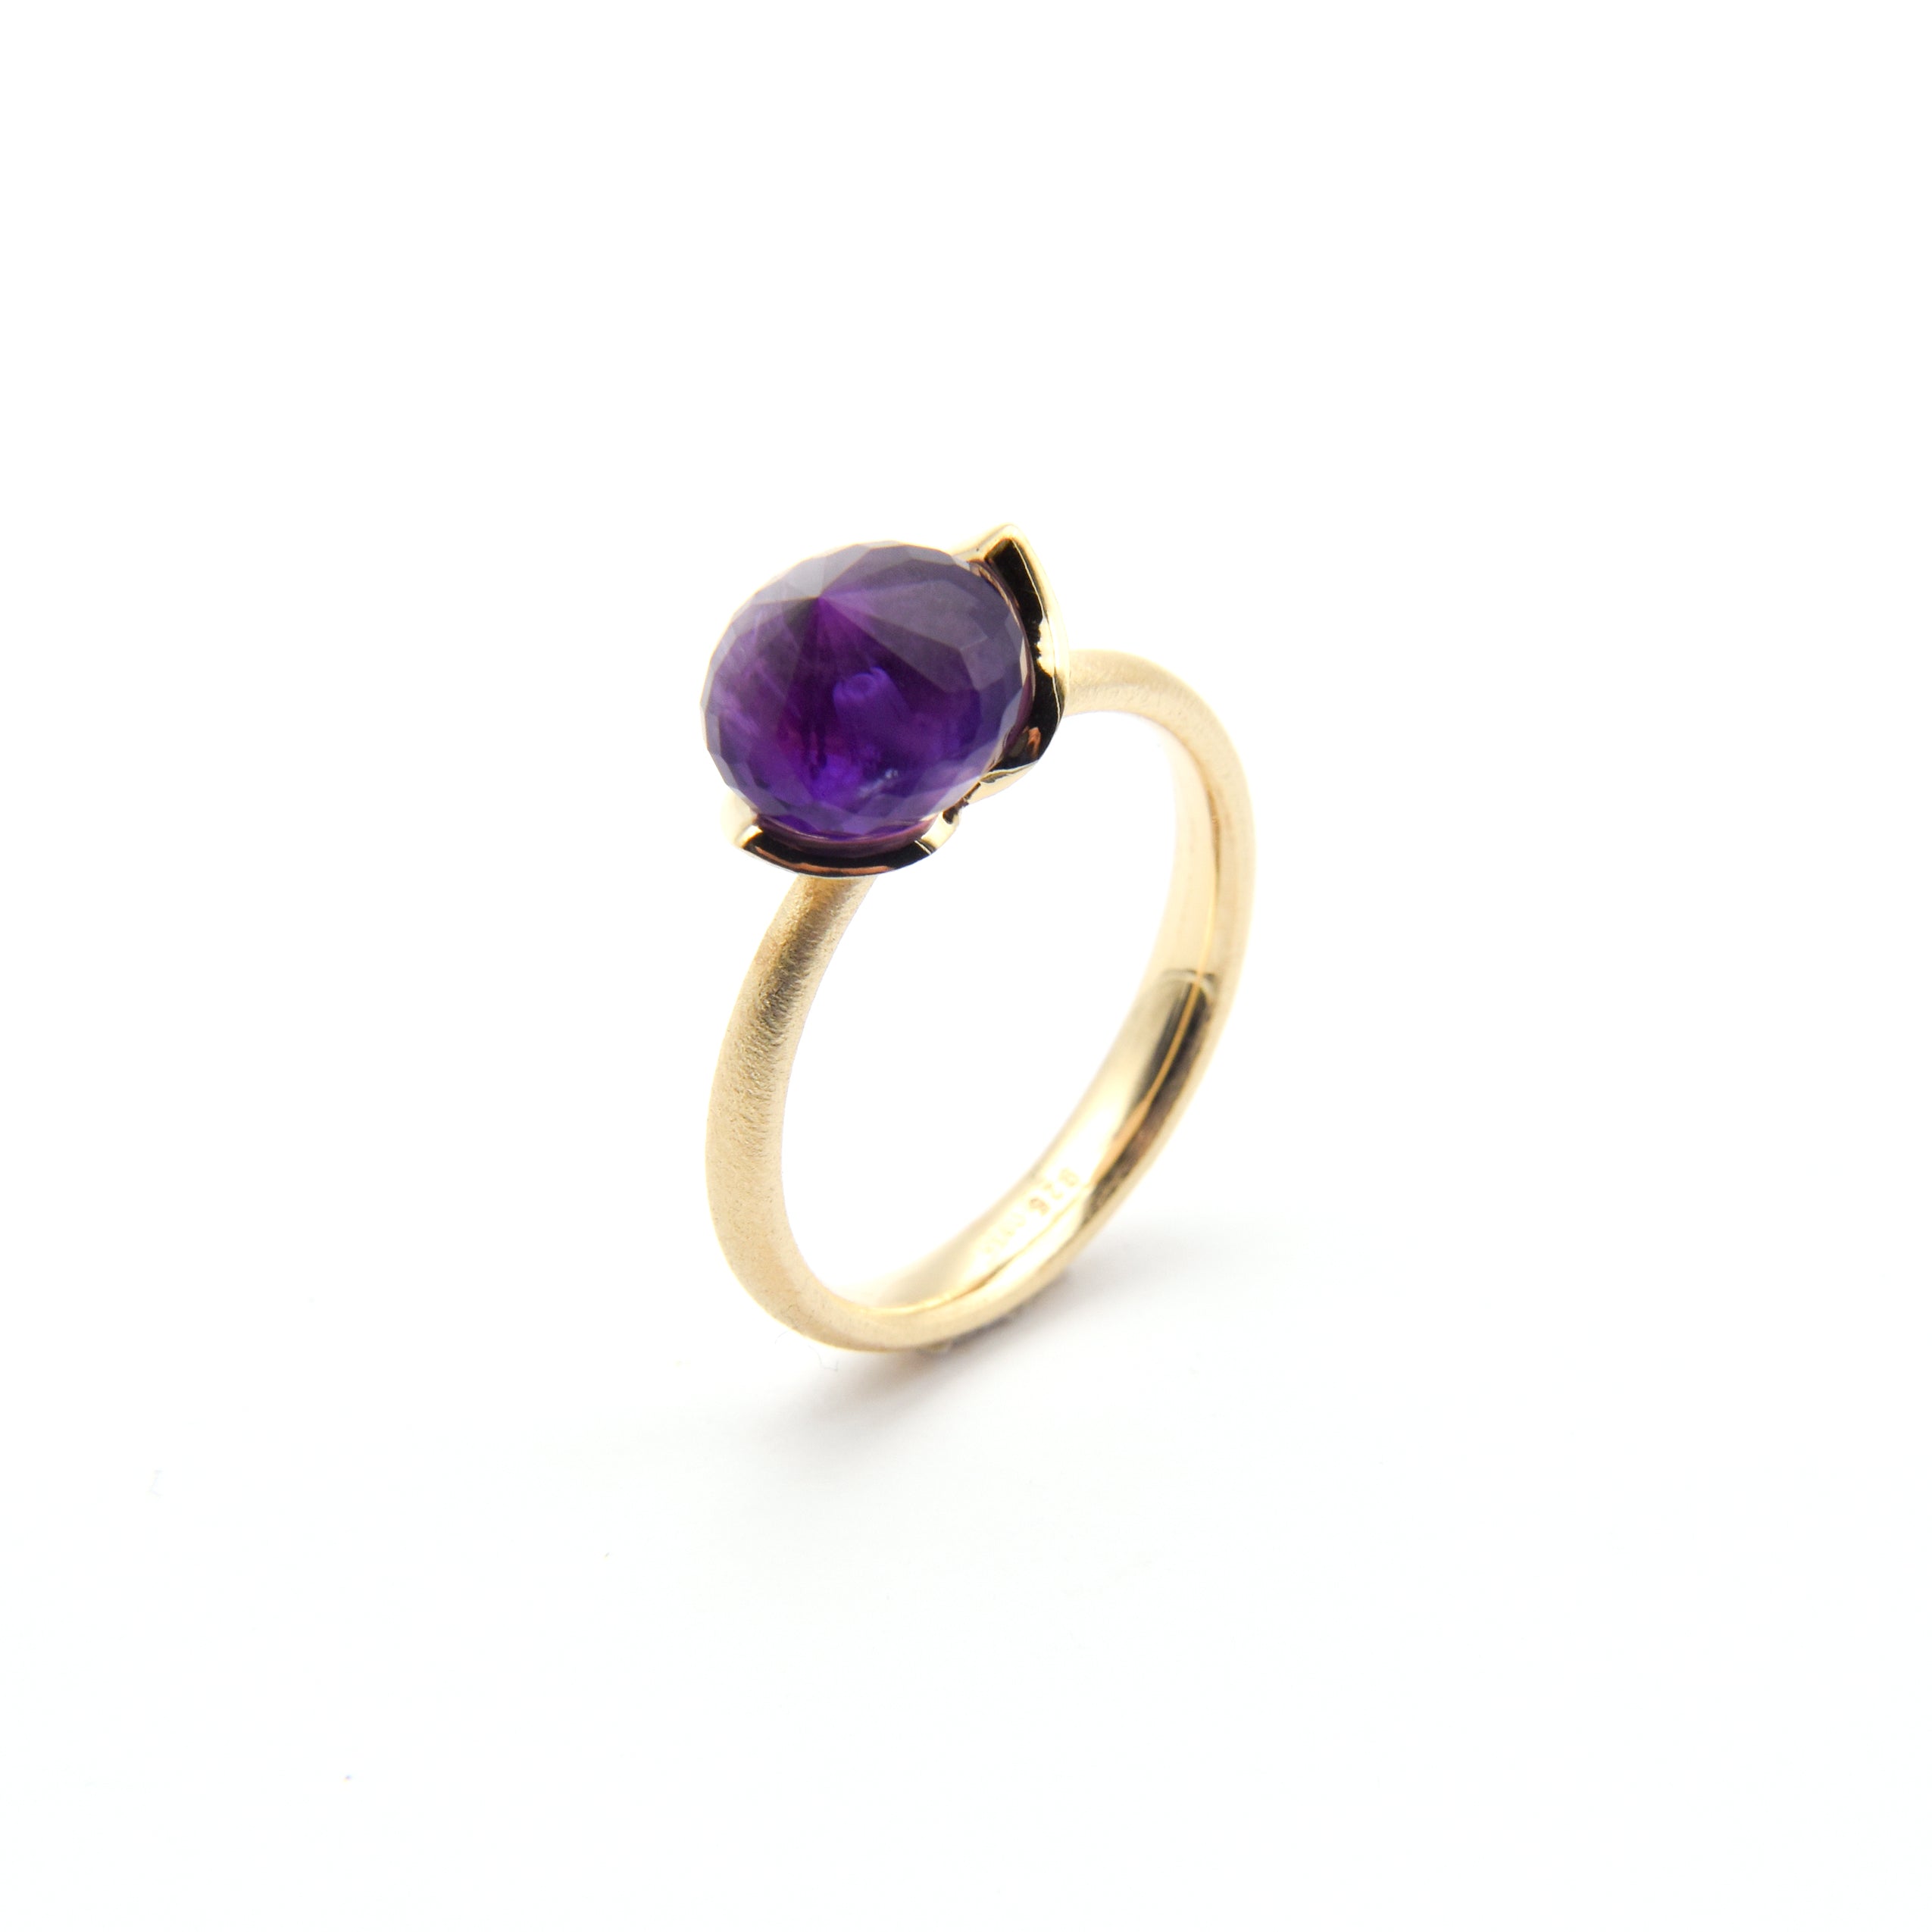 Dolce Ring "smal" mit Amethyst 925/-